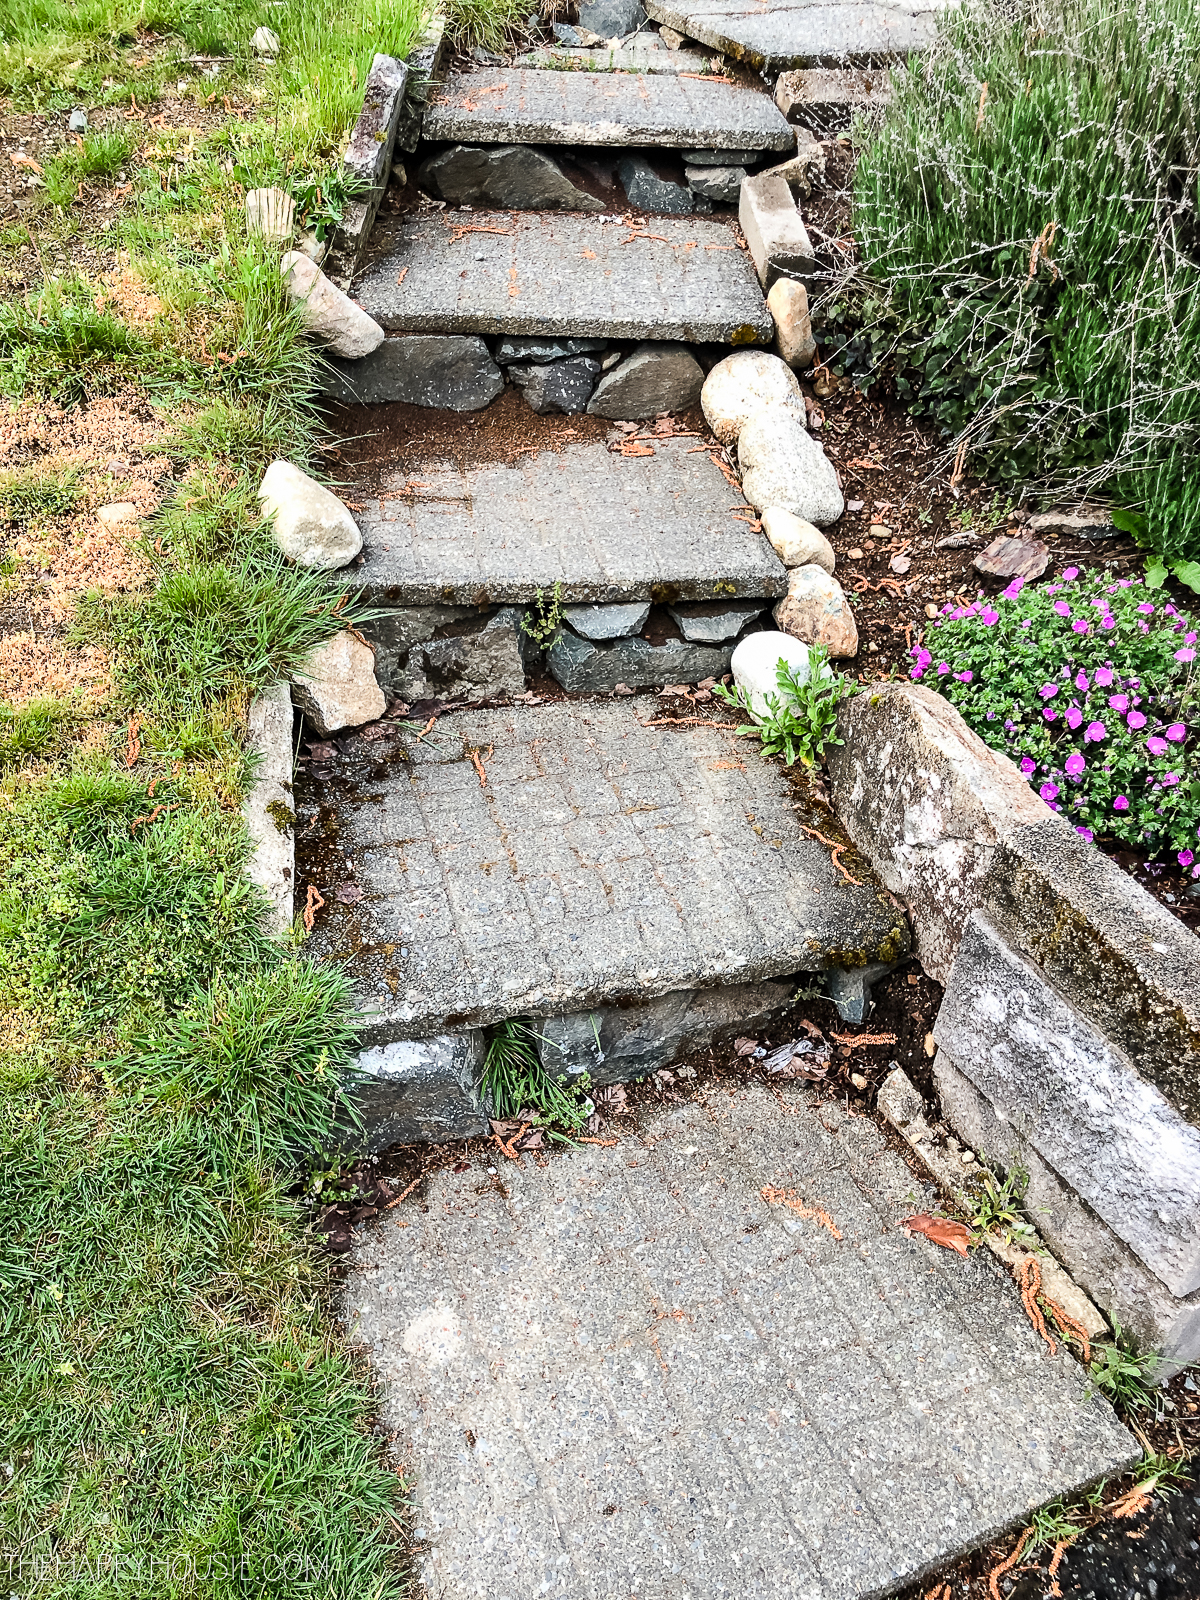 A small stone path leading up to the house.